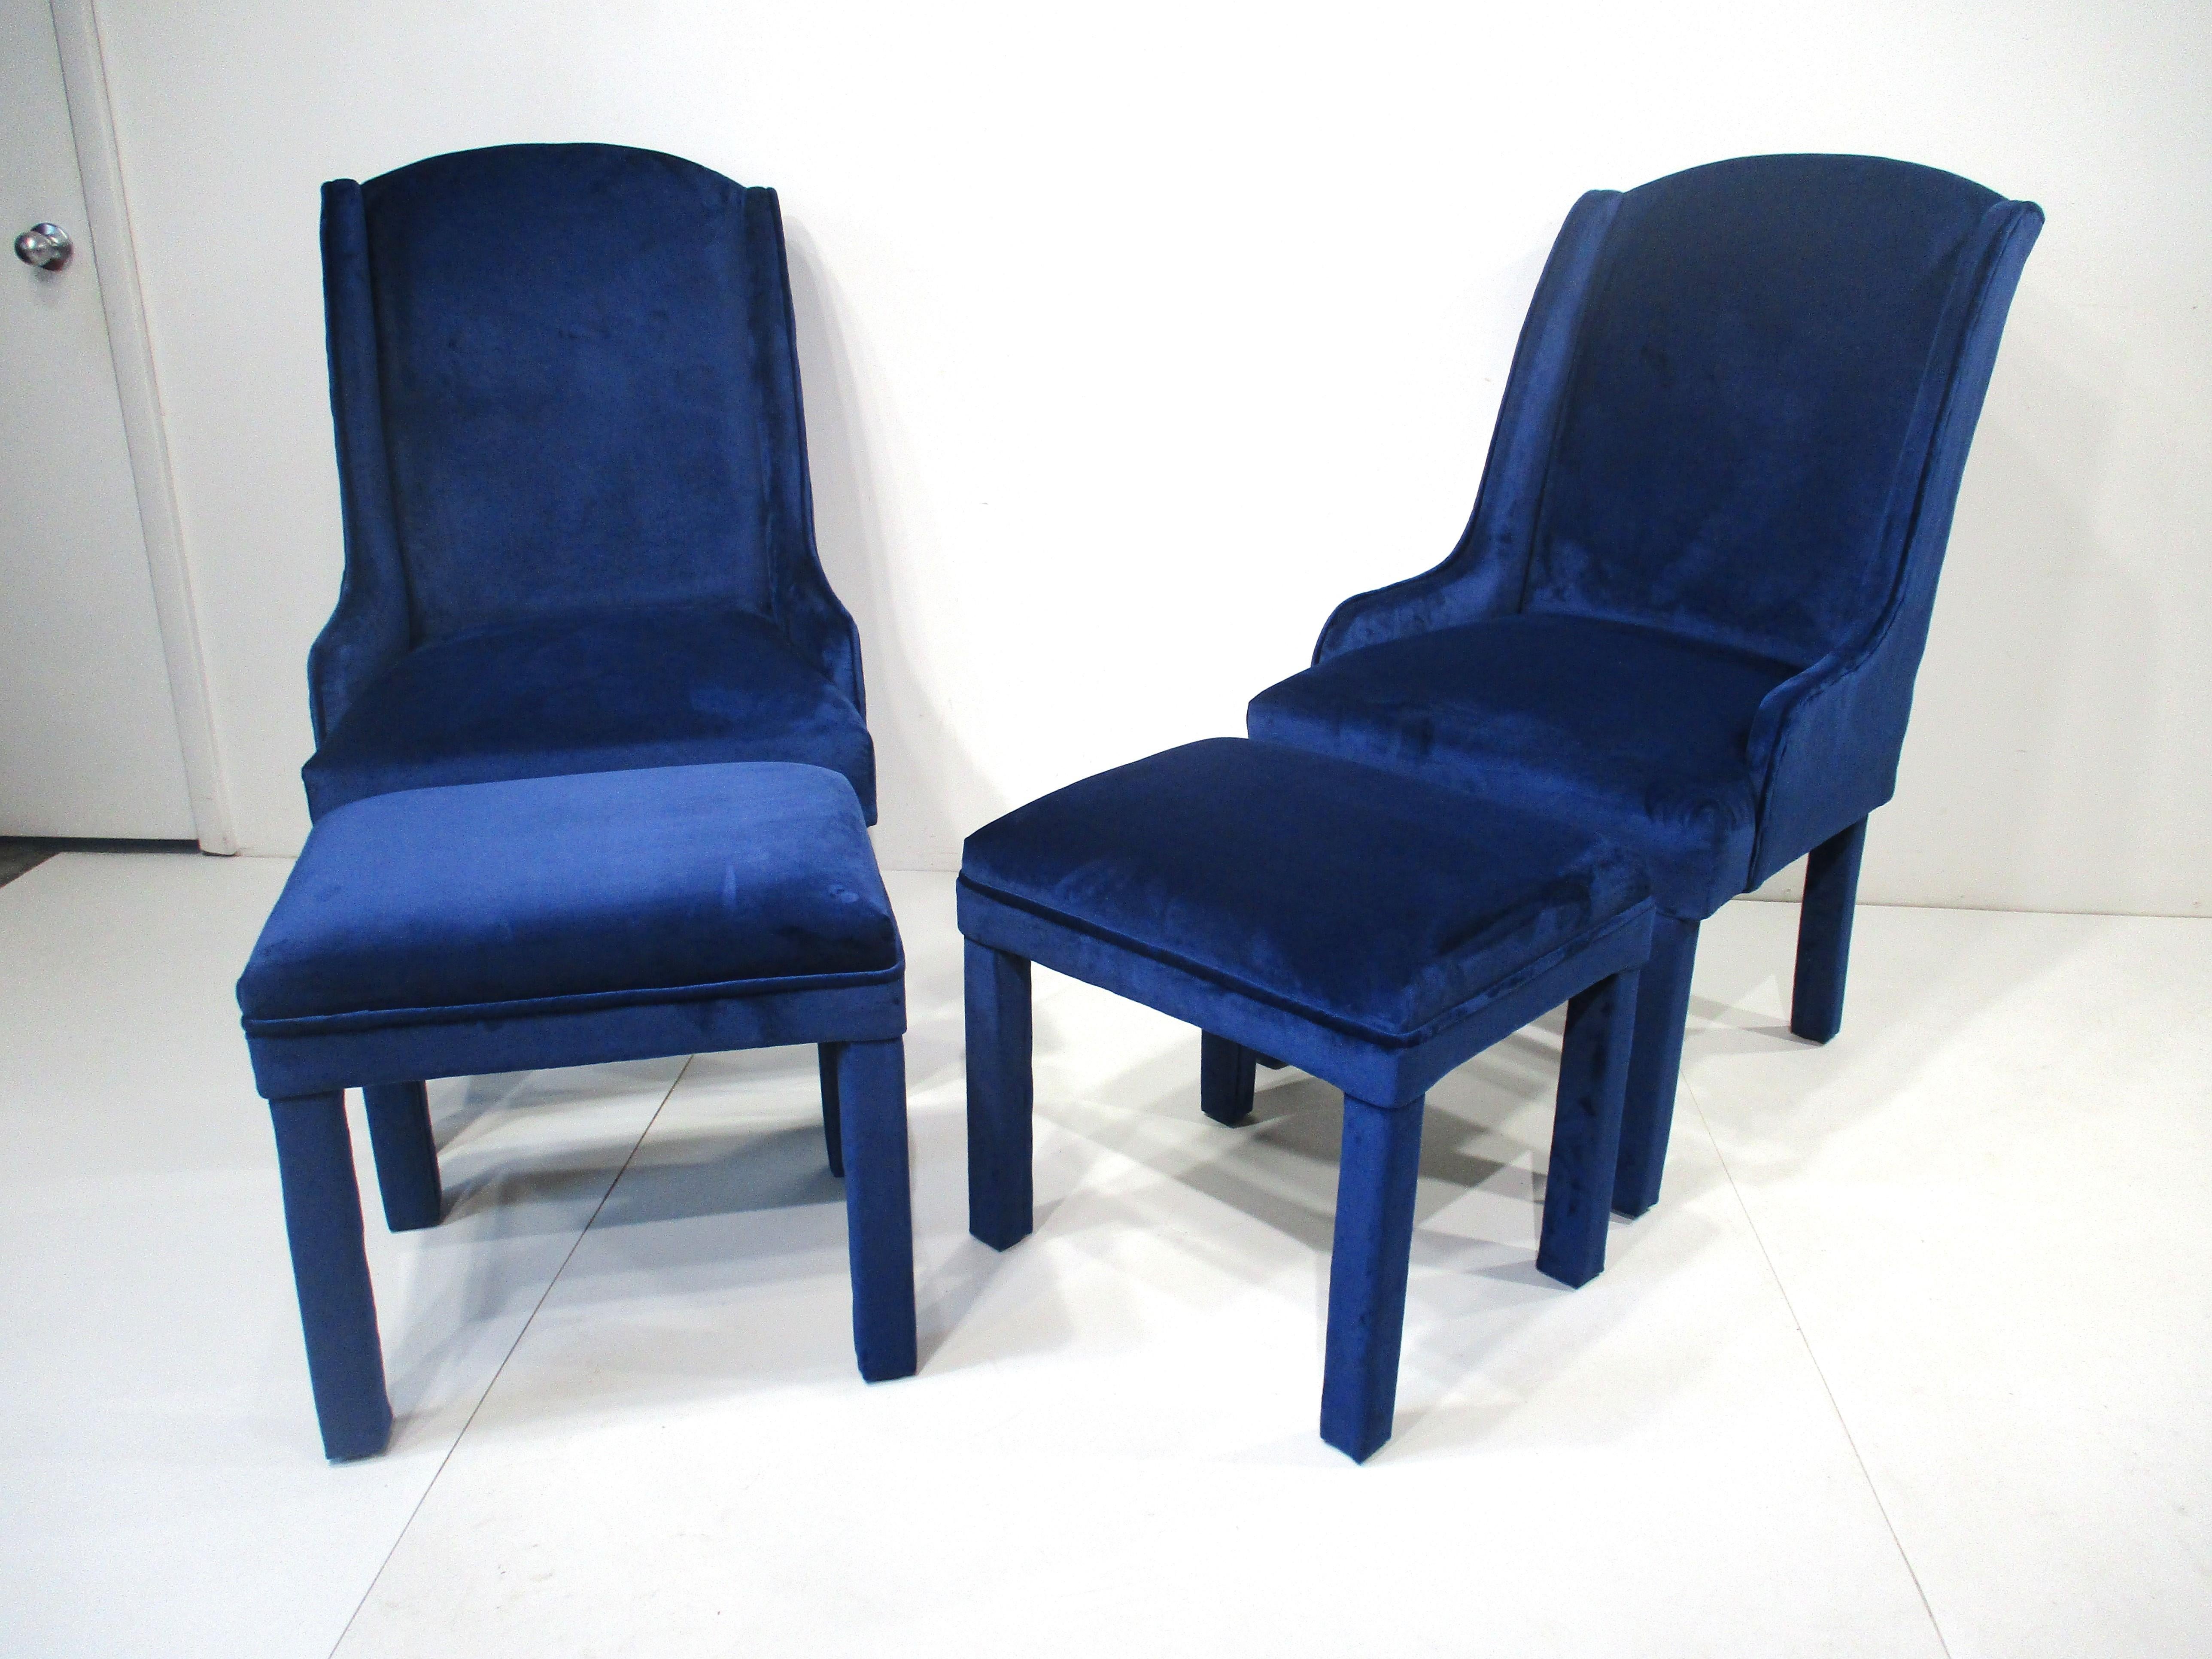 A pair of deep ocean blue smooth velvet Mid Century styled wing back lounge chairs with two matching ottomans . The chairs have higher backs and the sitting position is very comfortable , also included are two pillows in the same fabric . Designed